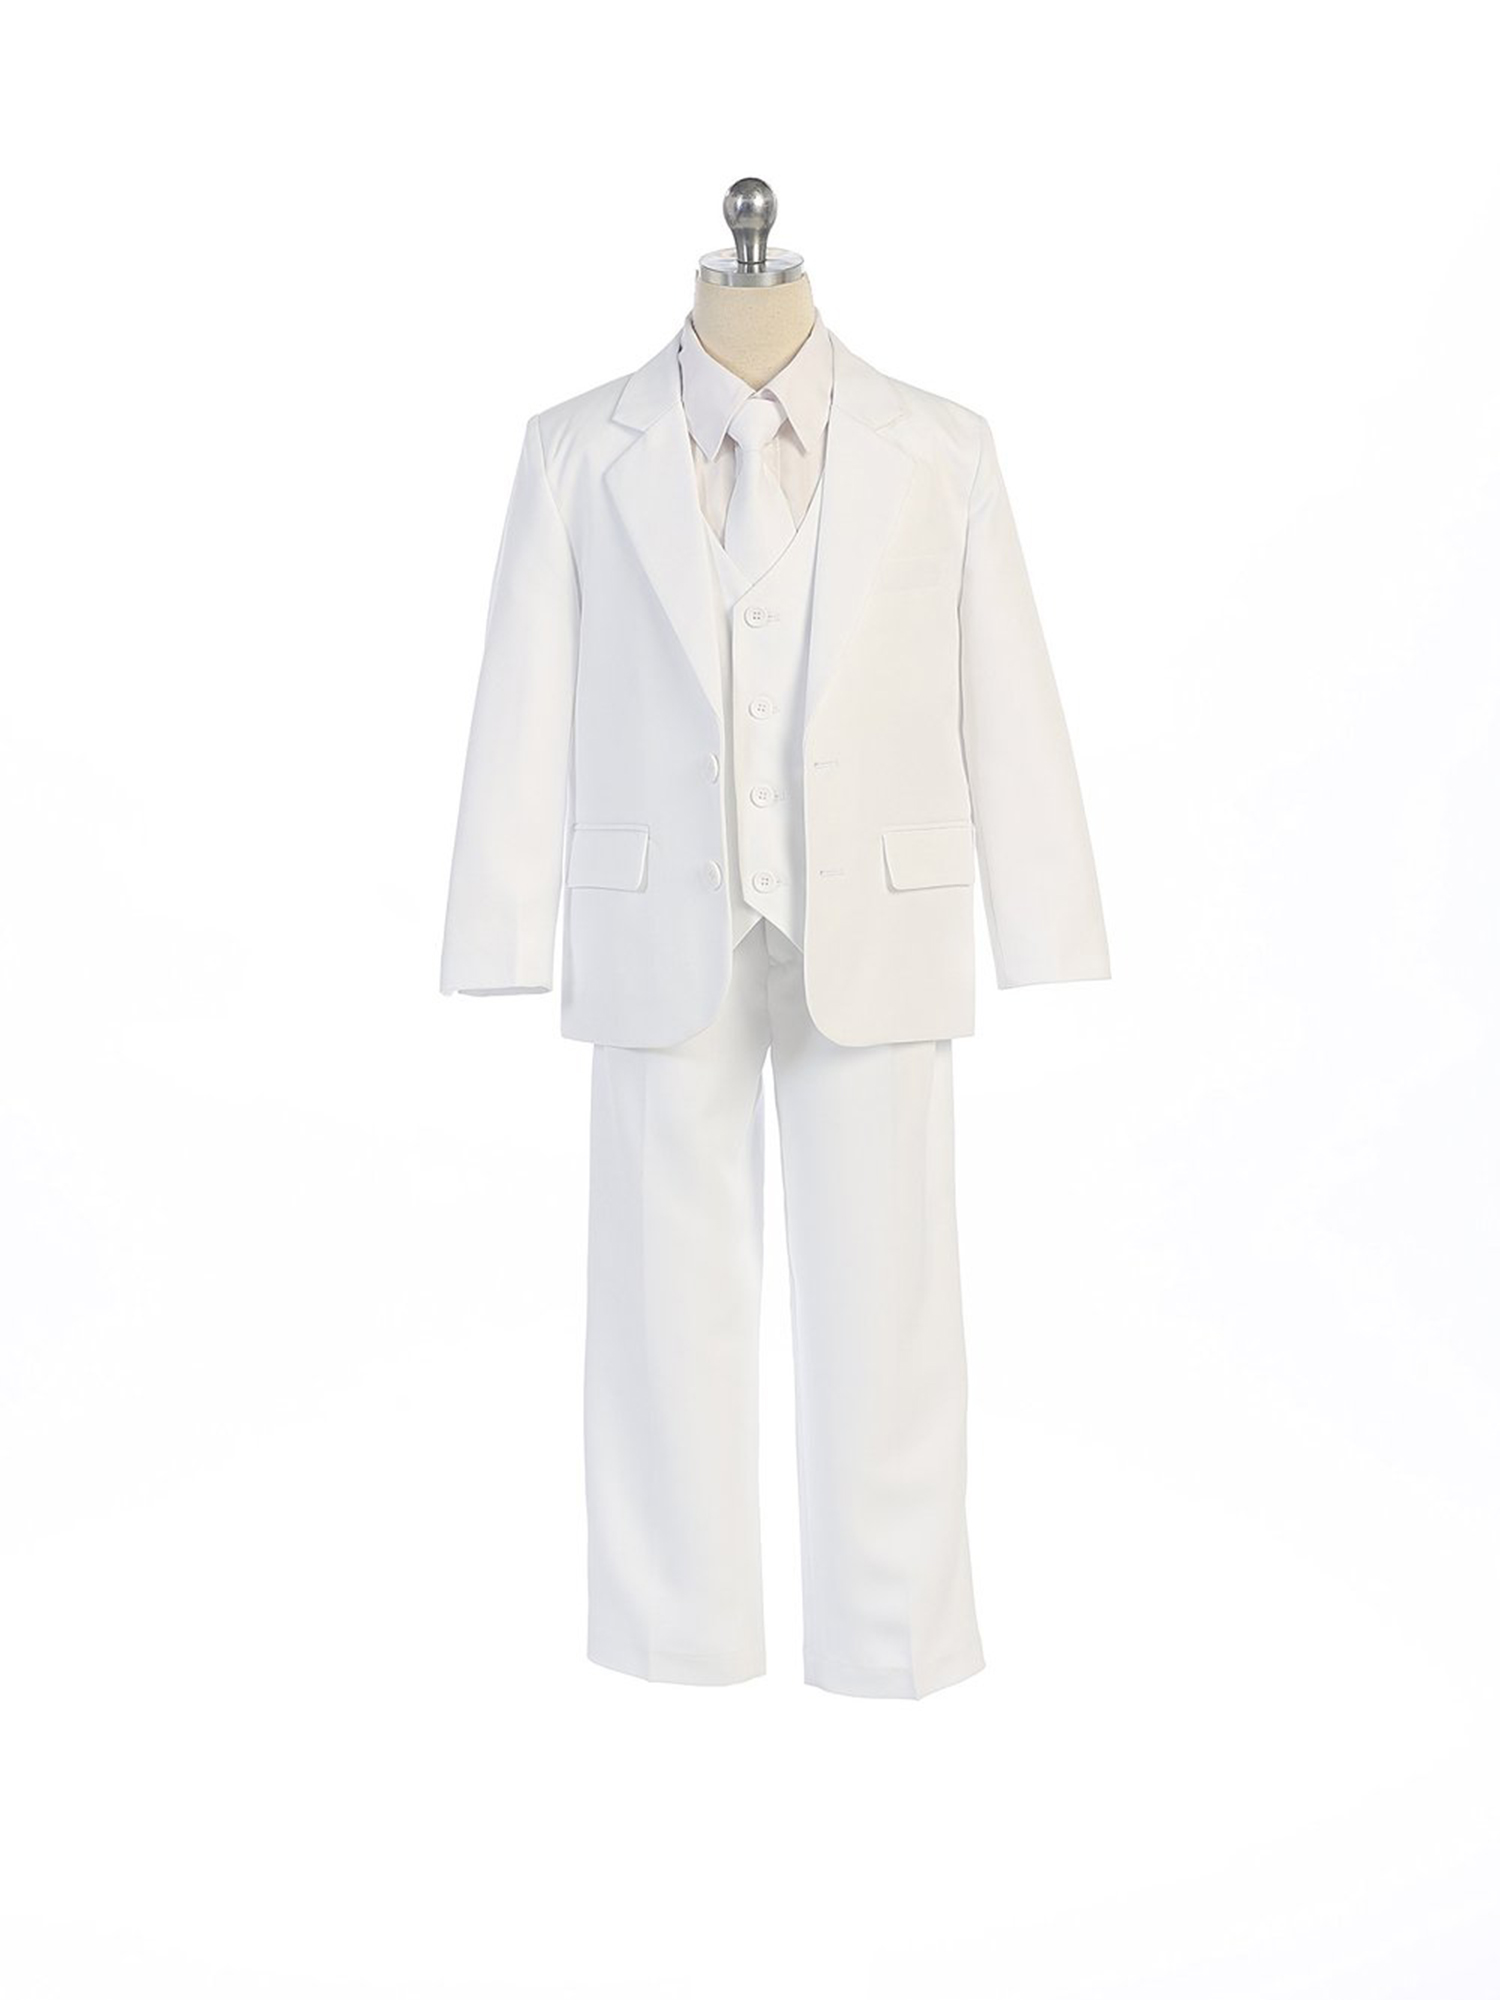 COLE Boys Suit with Shirt and Vest (5-Piece) - White - Size 6